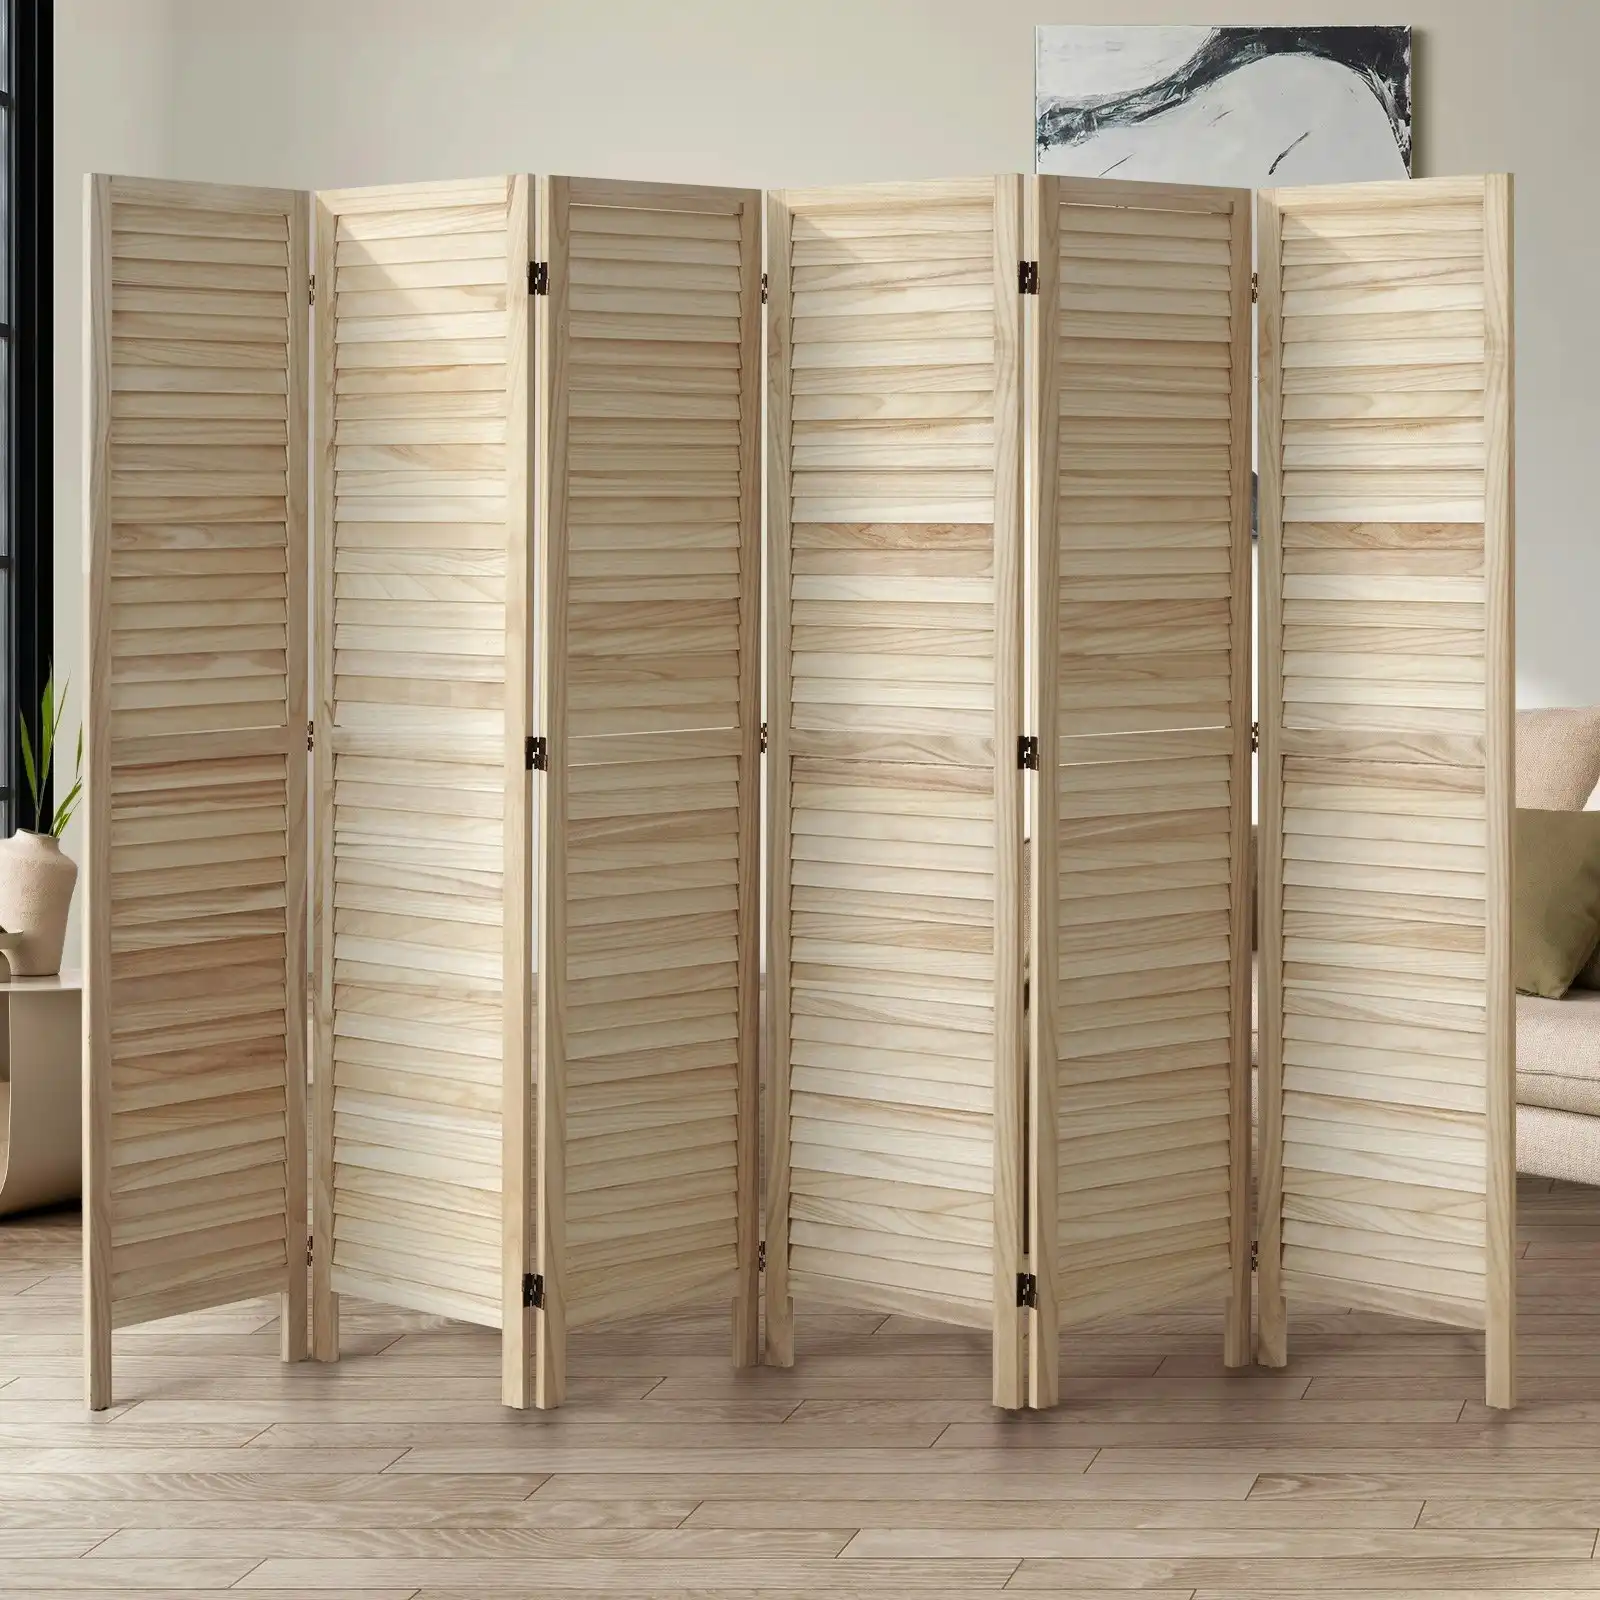 Oikiture 6 Panel Room Divider Privacy Screen Partition Timber Wooden Natural